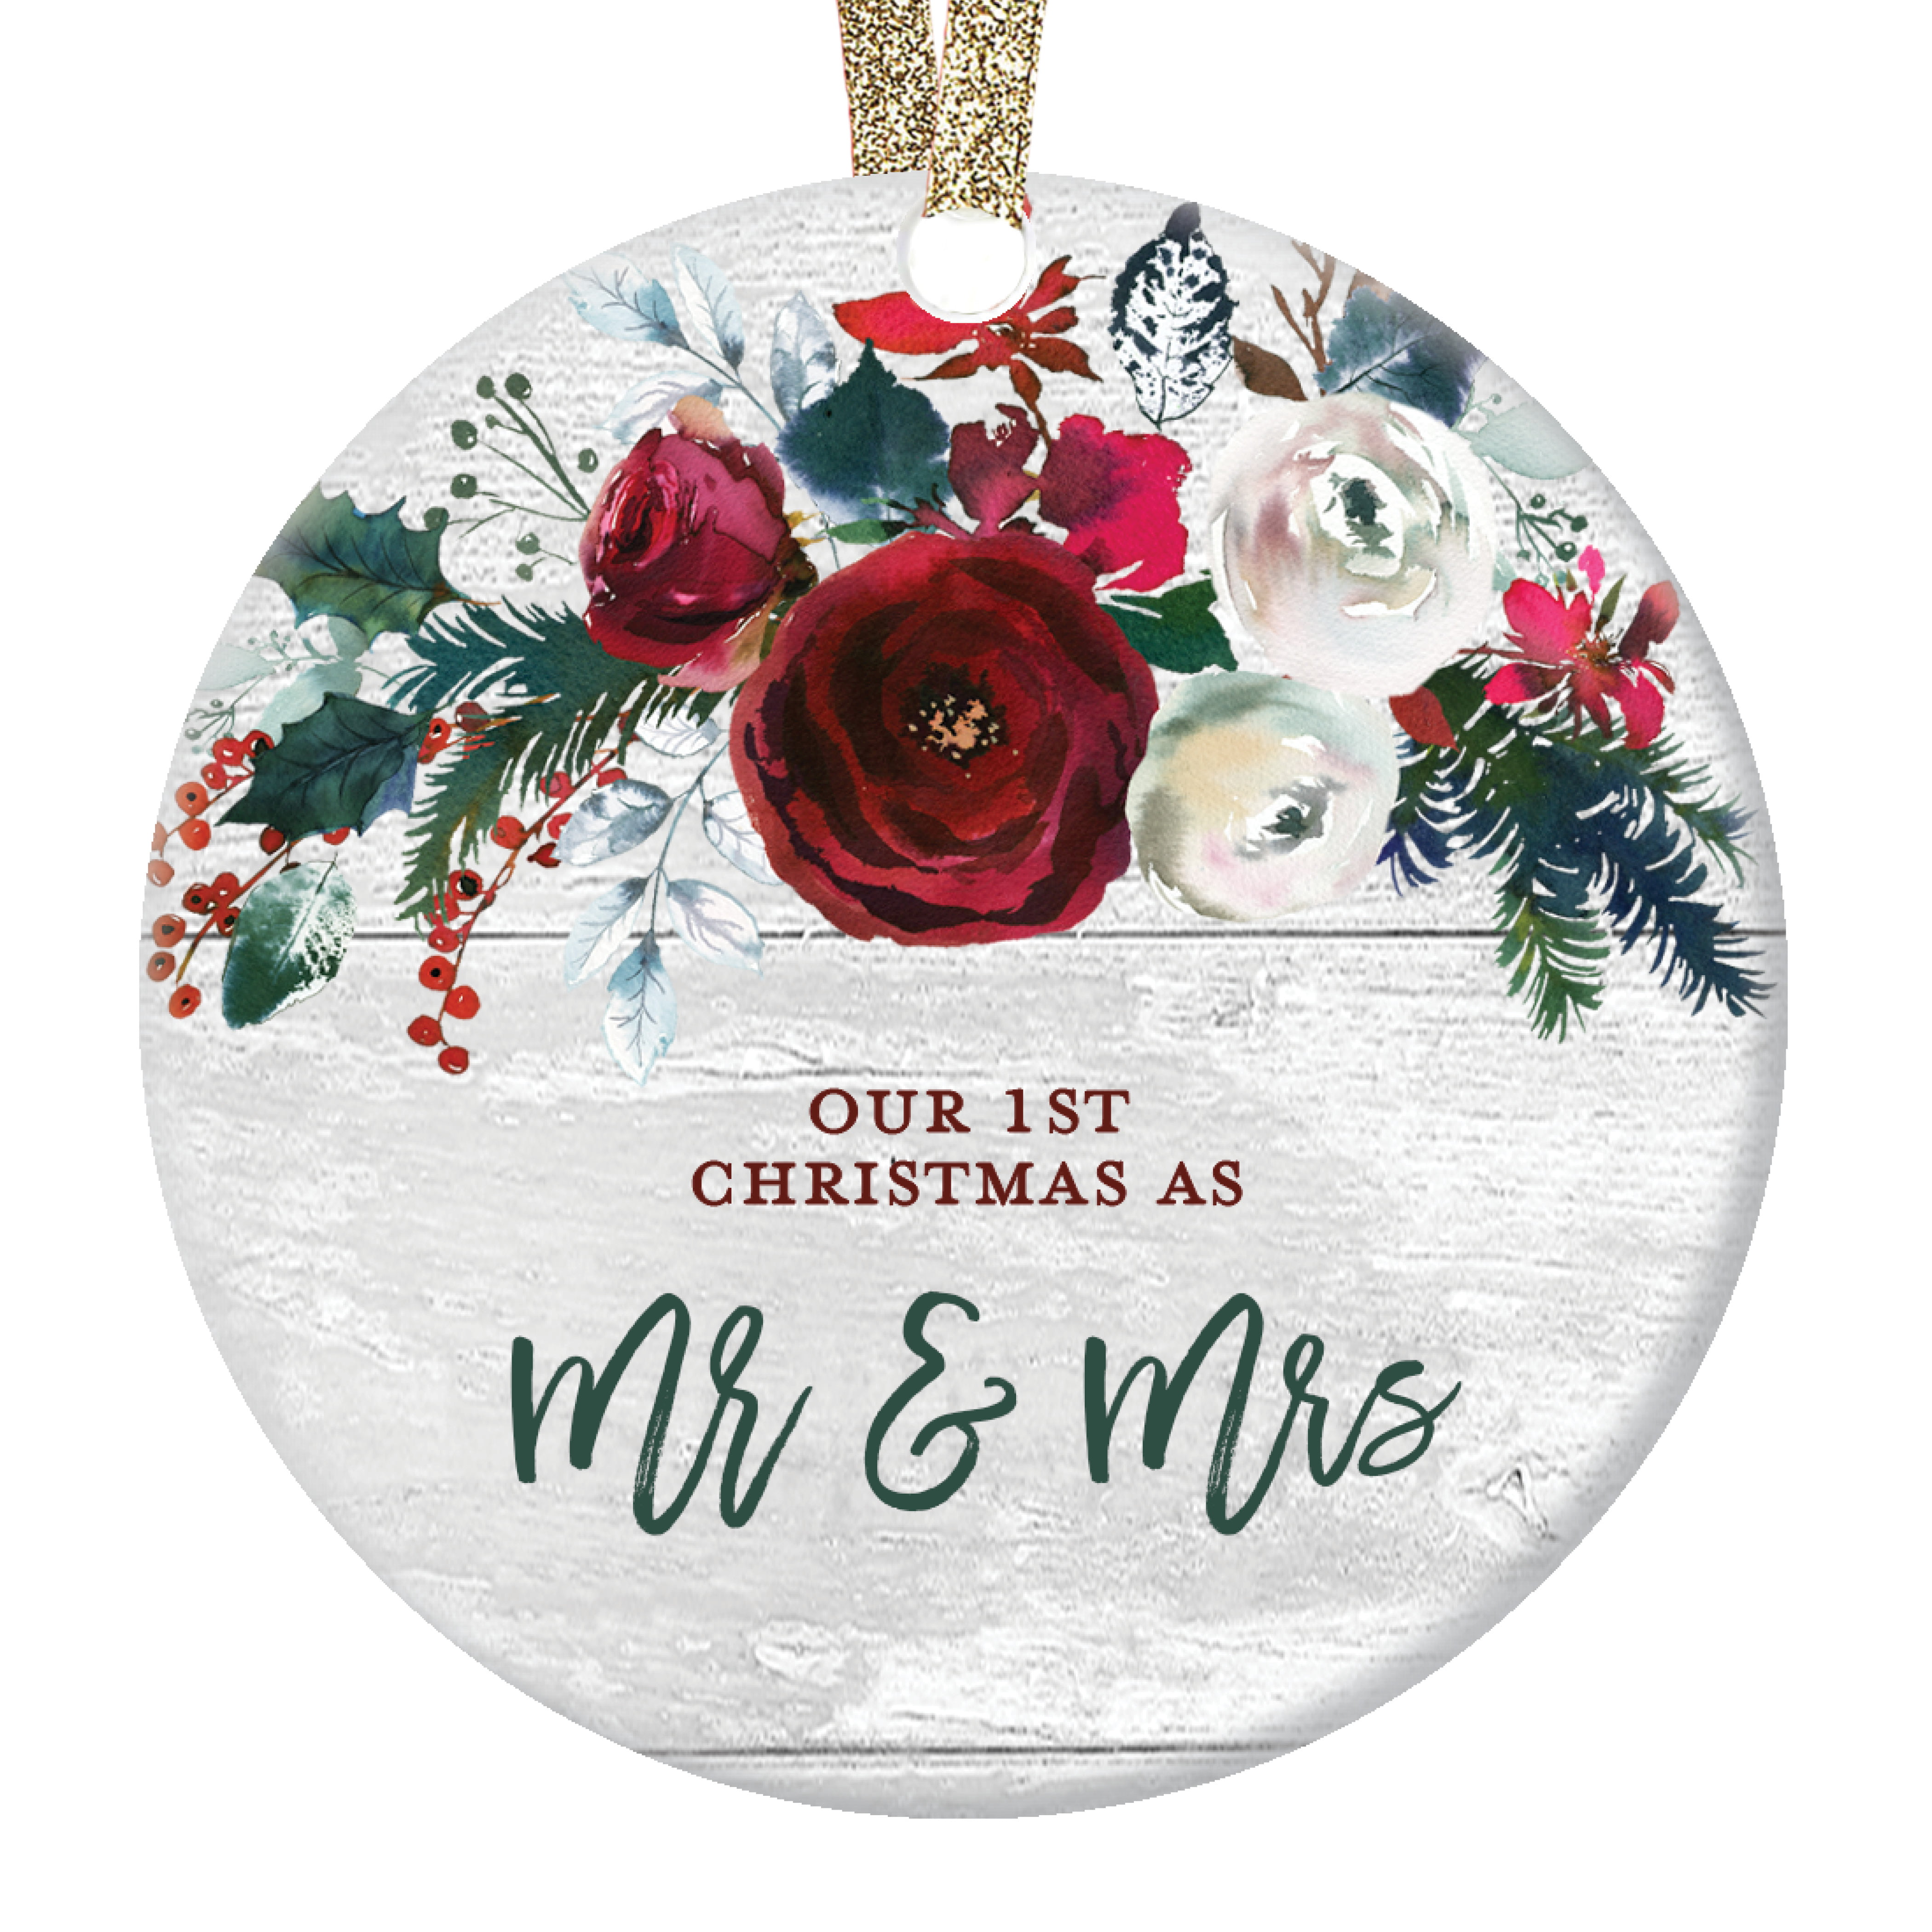 1st Christmas Married Modern Farmhouse Mr & Mrs Ornament 2019 wood slice ornament 3 First Gift for Newlywed Couple Bride Groom Rustic Present Keepsake Present